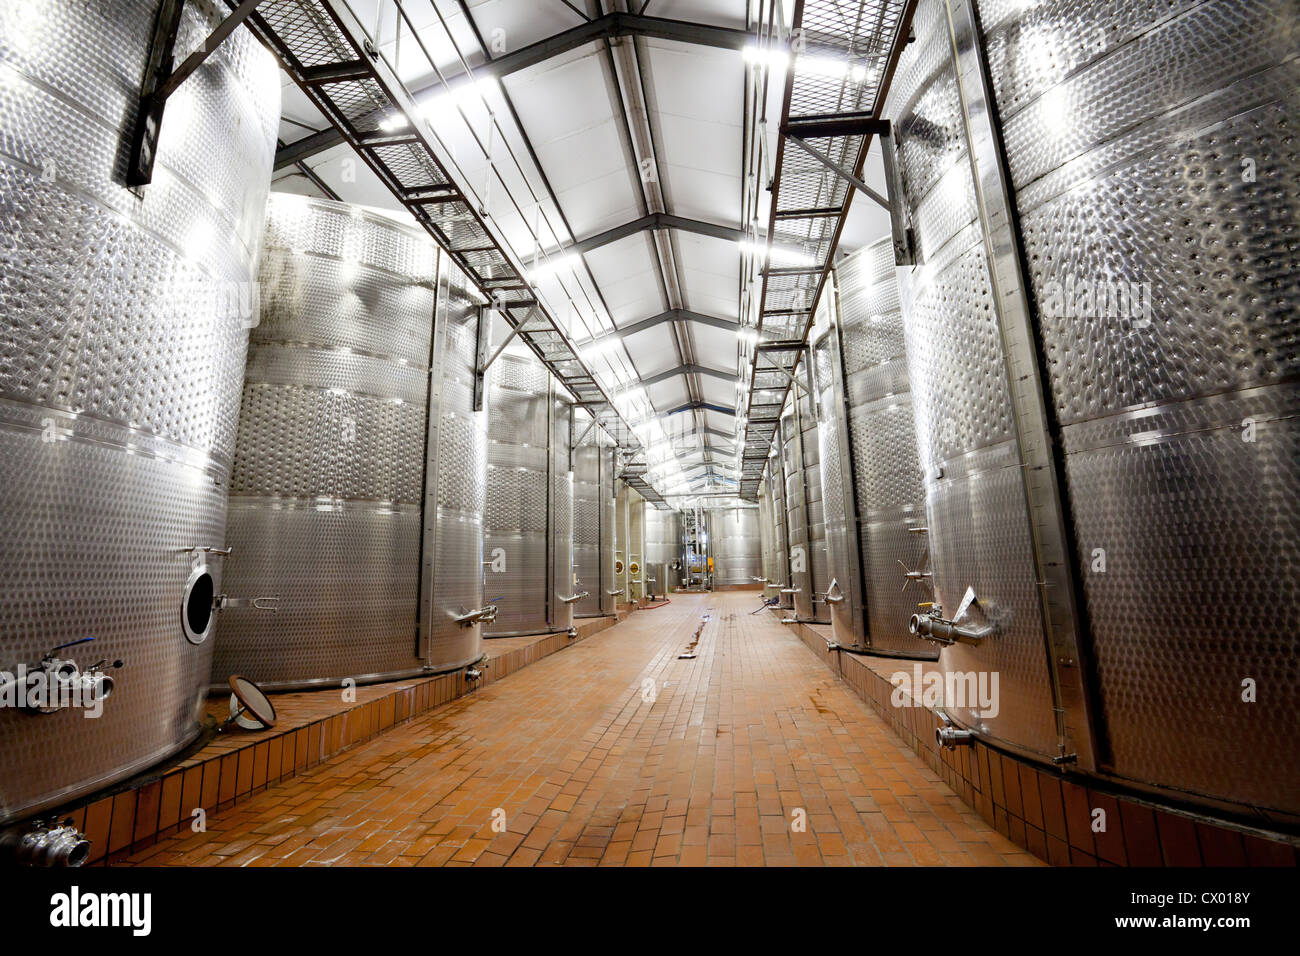 modern wine factory with large storage tanks Stock Photo